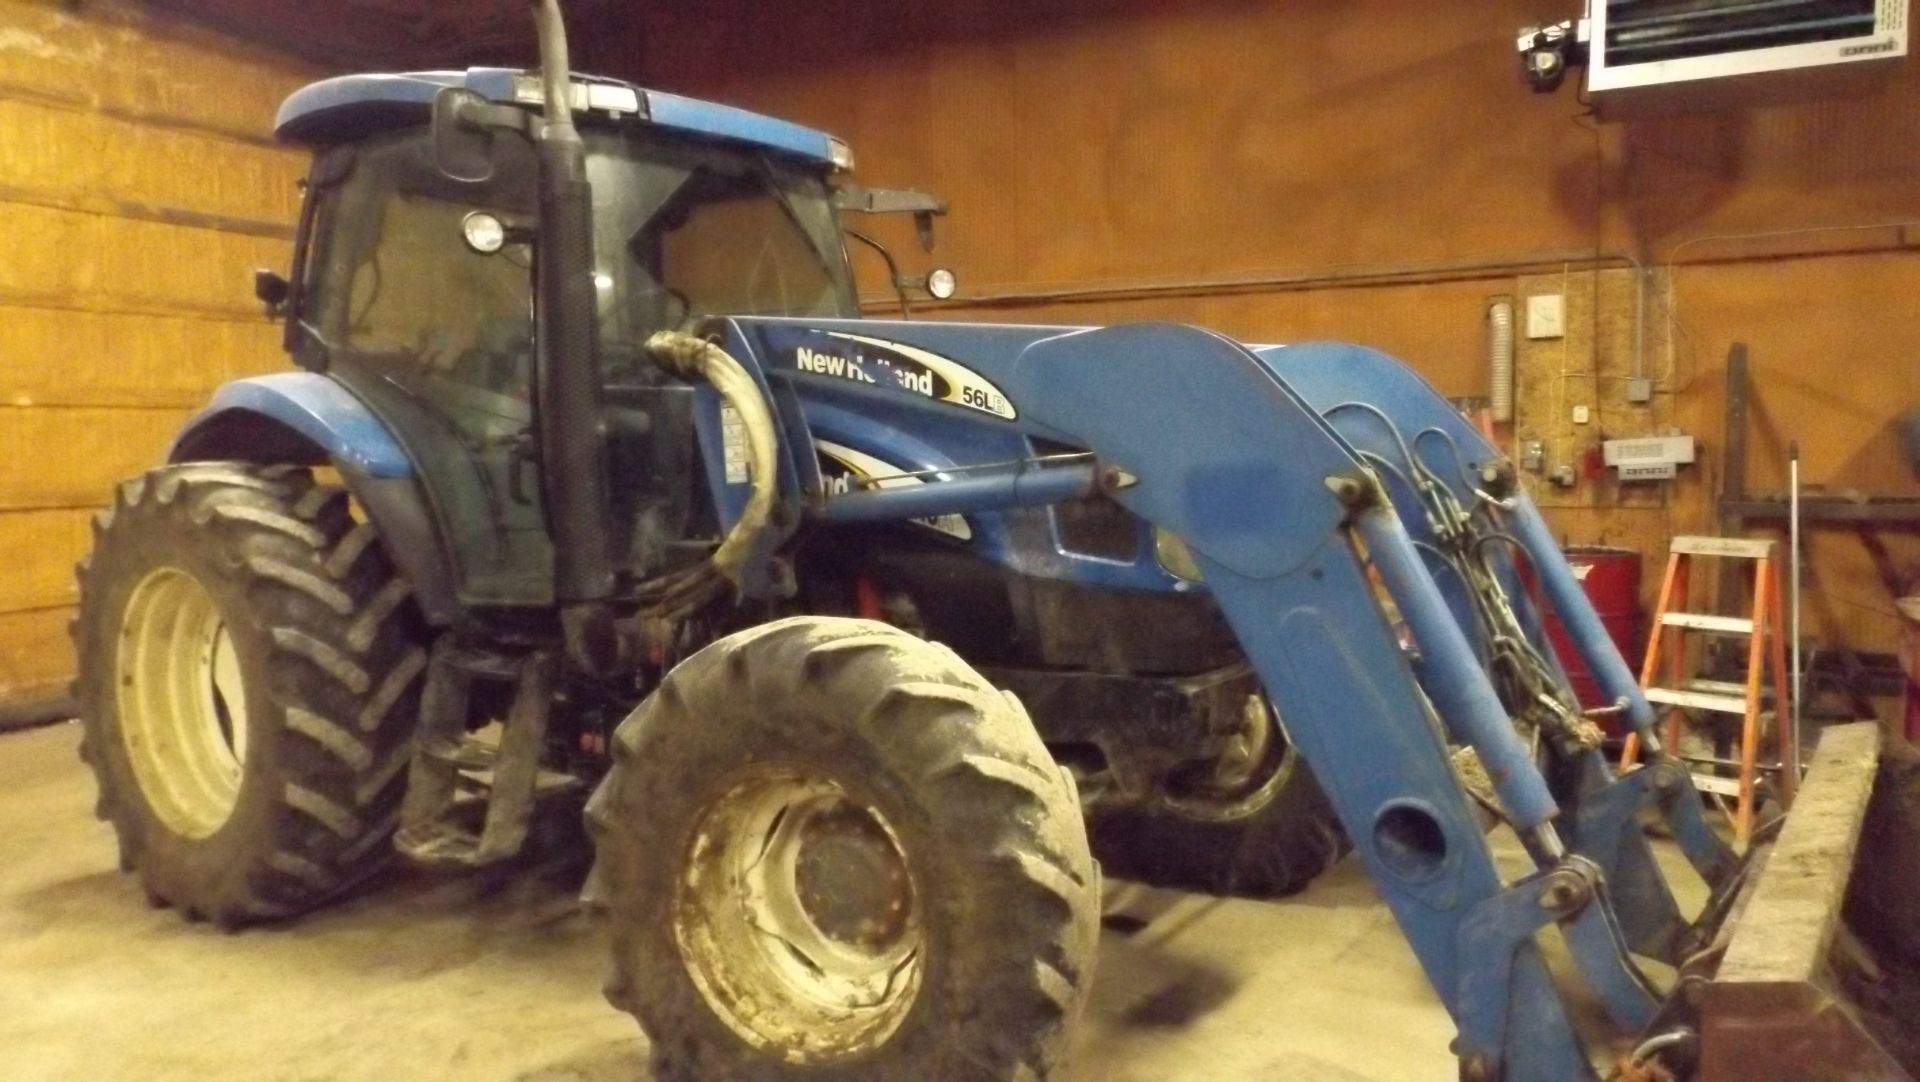 New Holland TS115A Tractor '06, sn# ACP258689 6241 Hrs, MFWD, Cab, 115 HP, 12/2, 3 PT, 540 Pto, 2